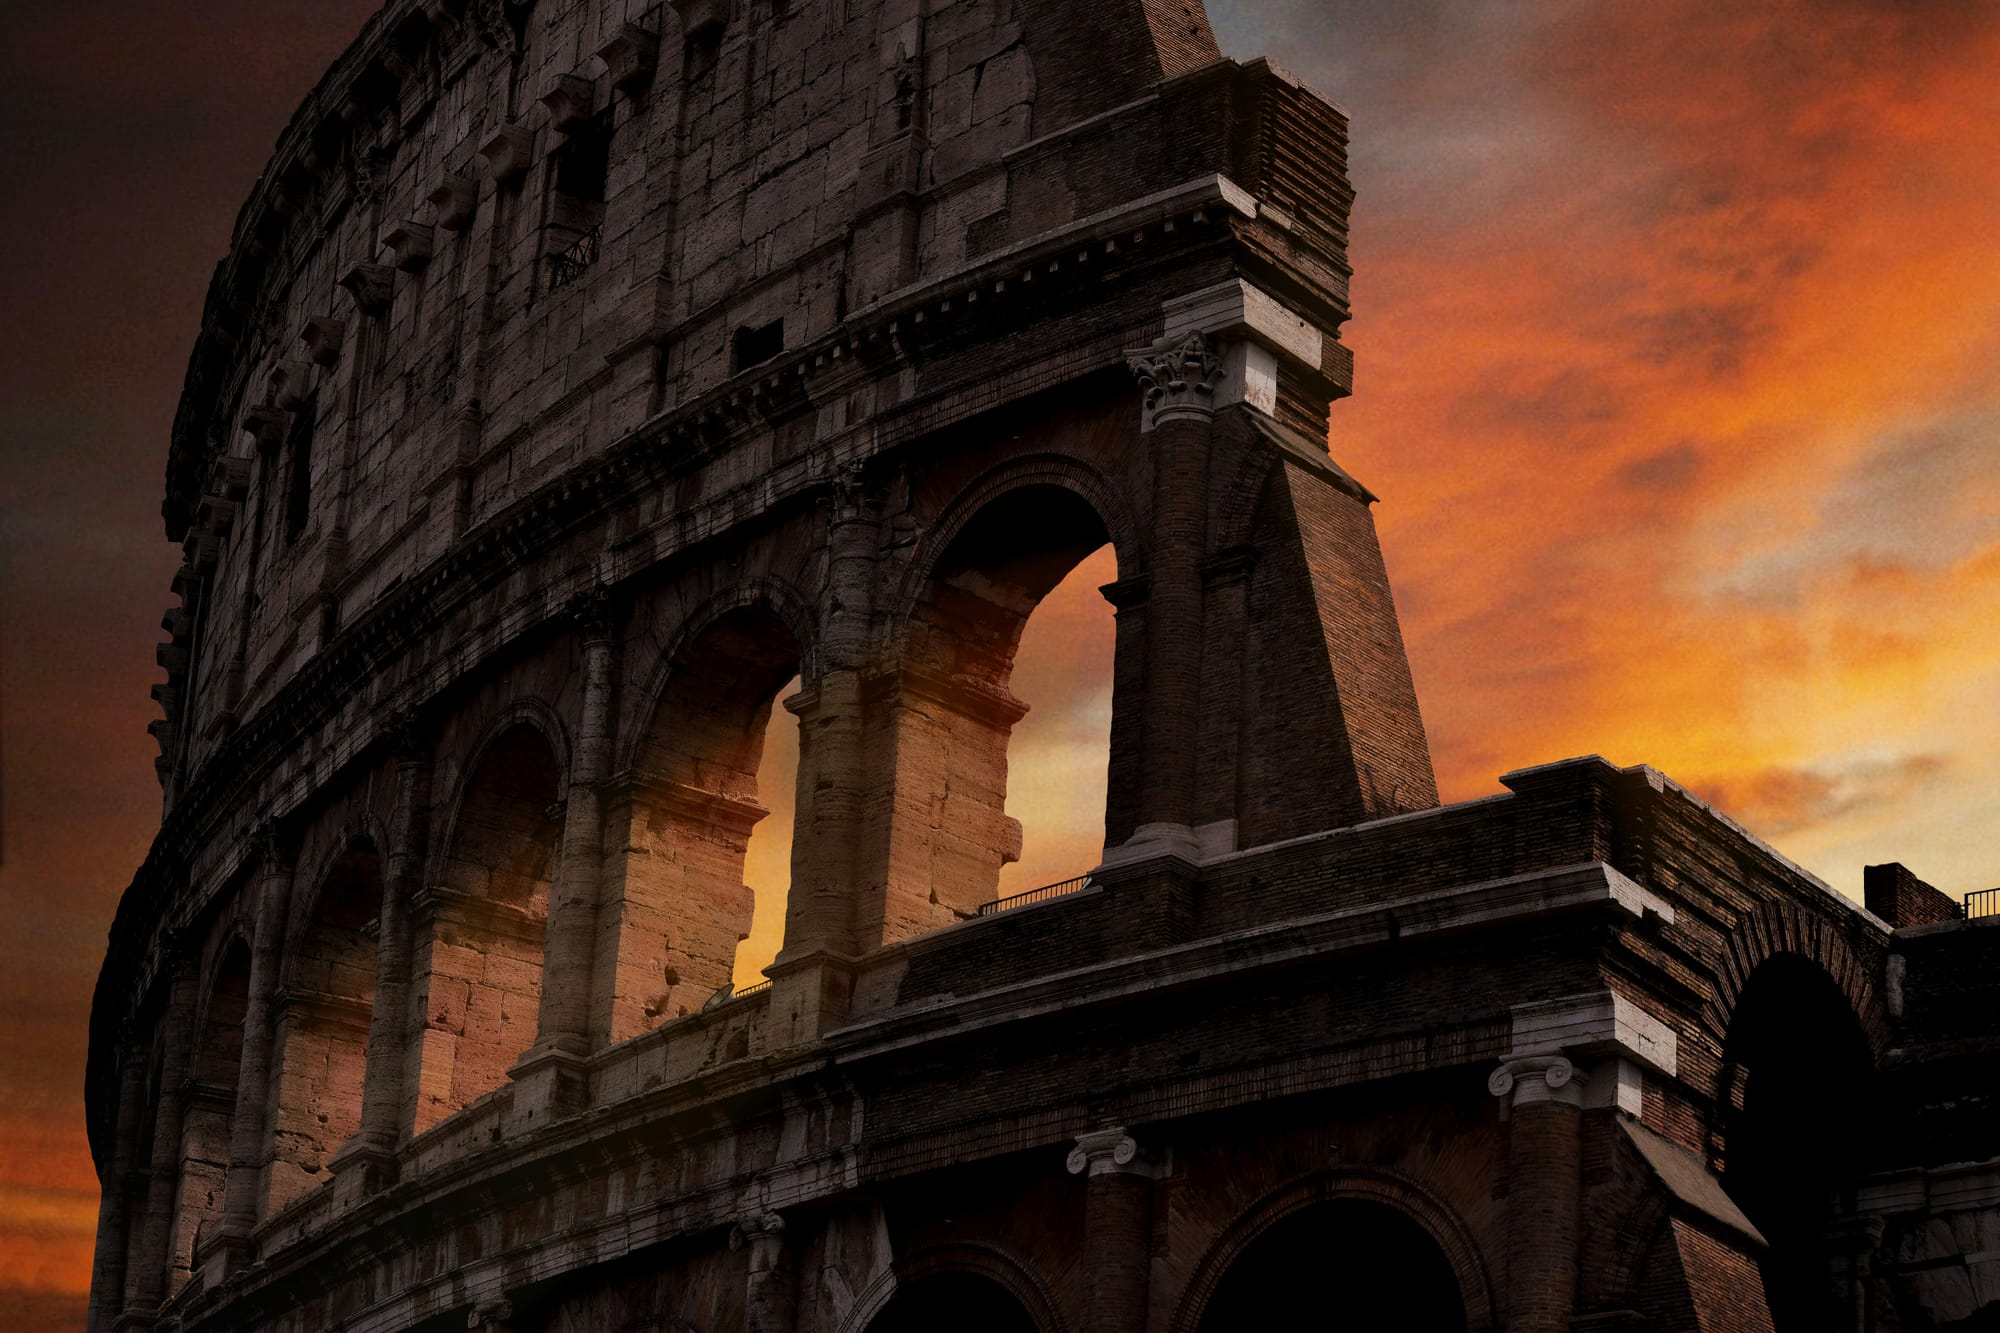 The Colosseum during golden hour